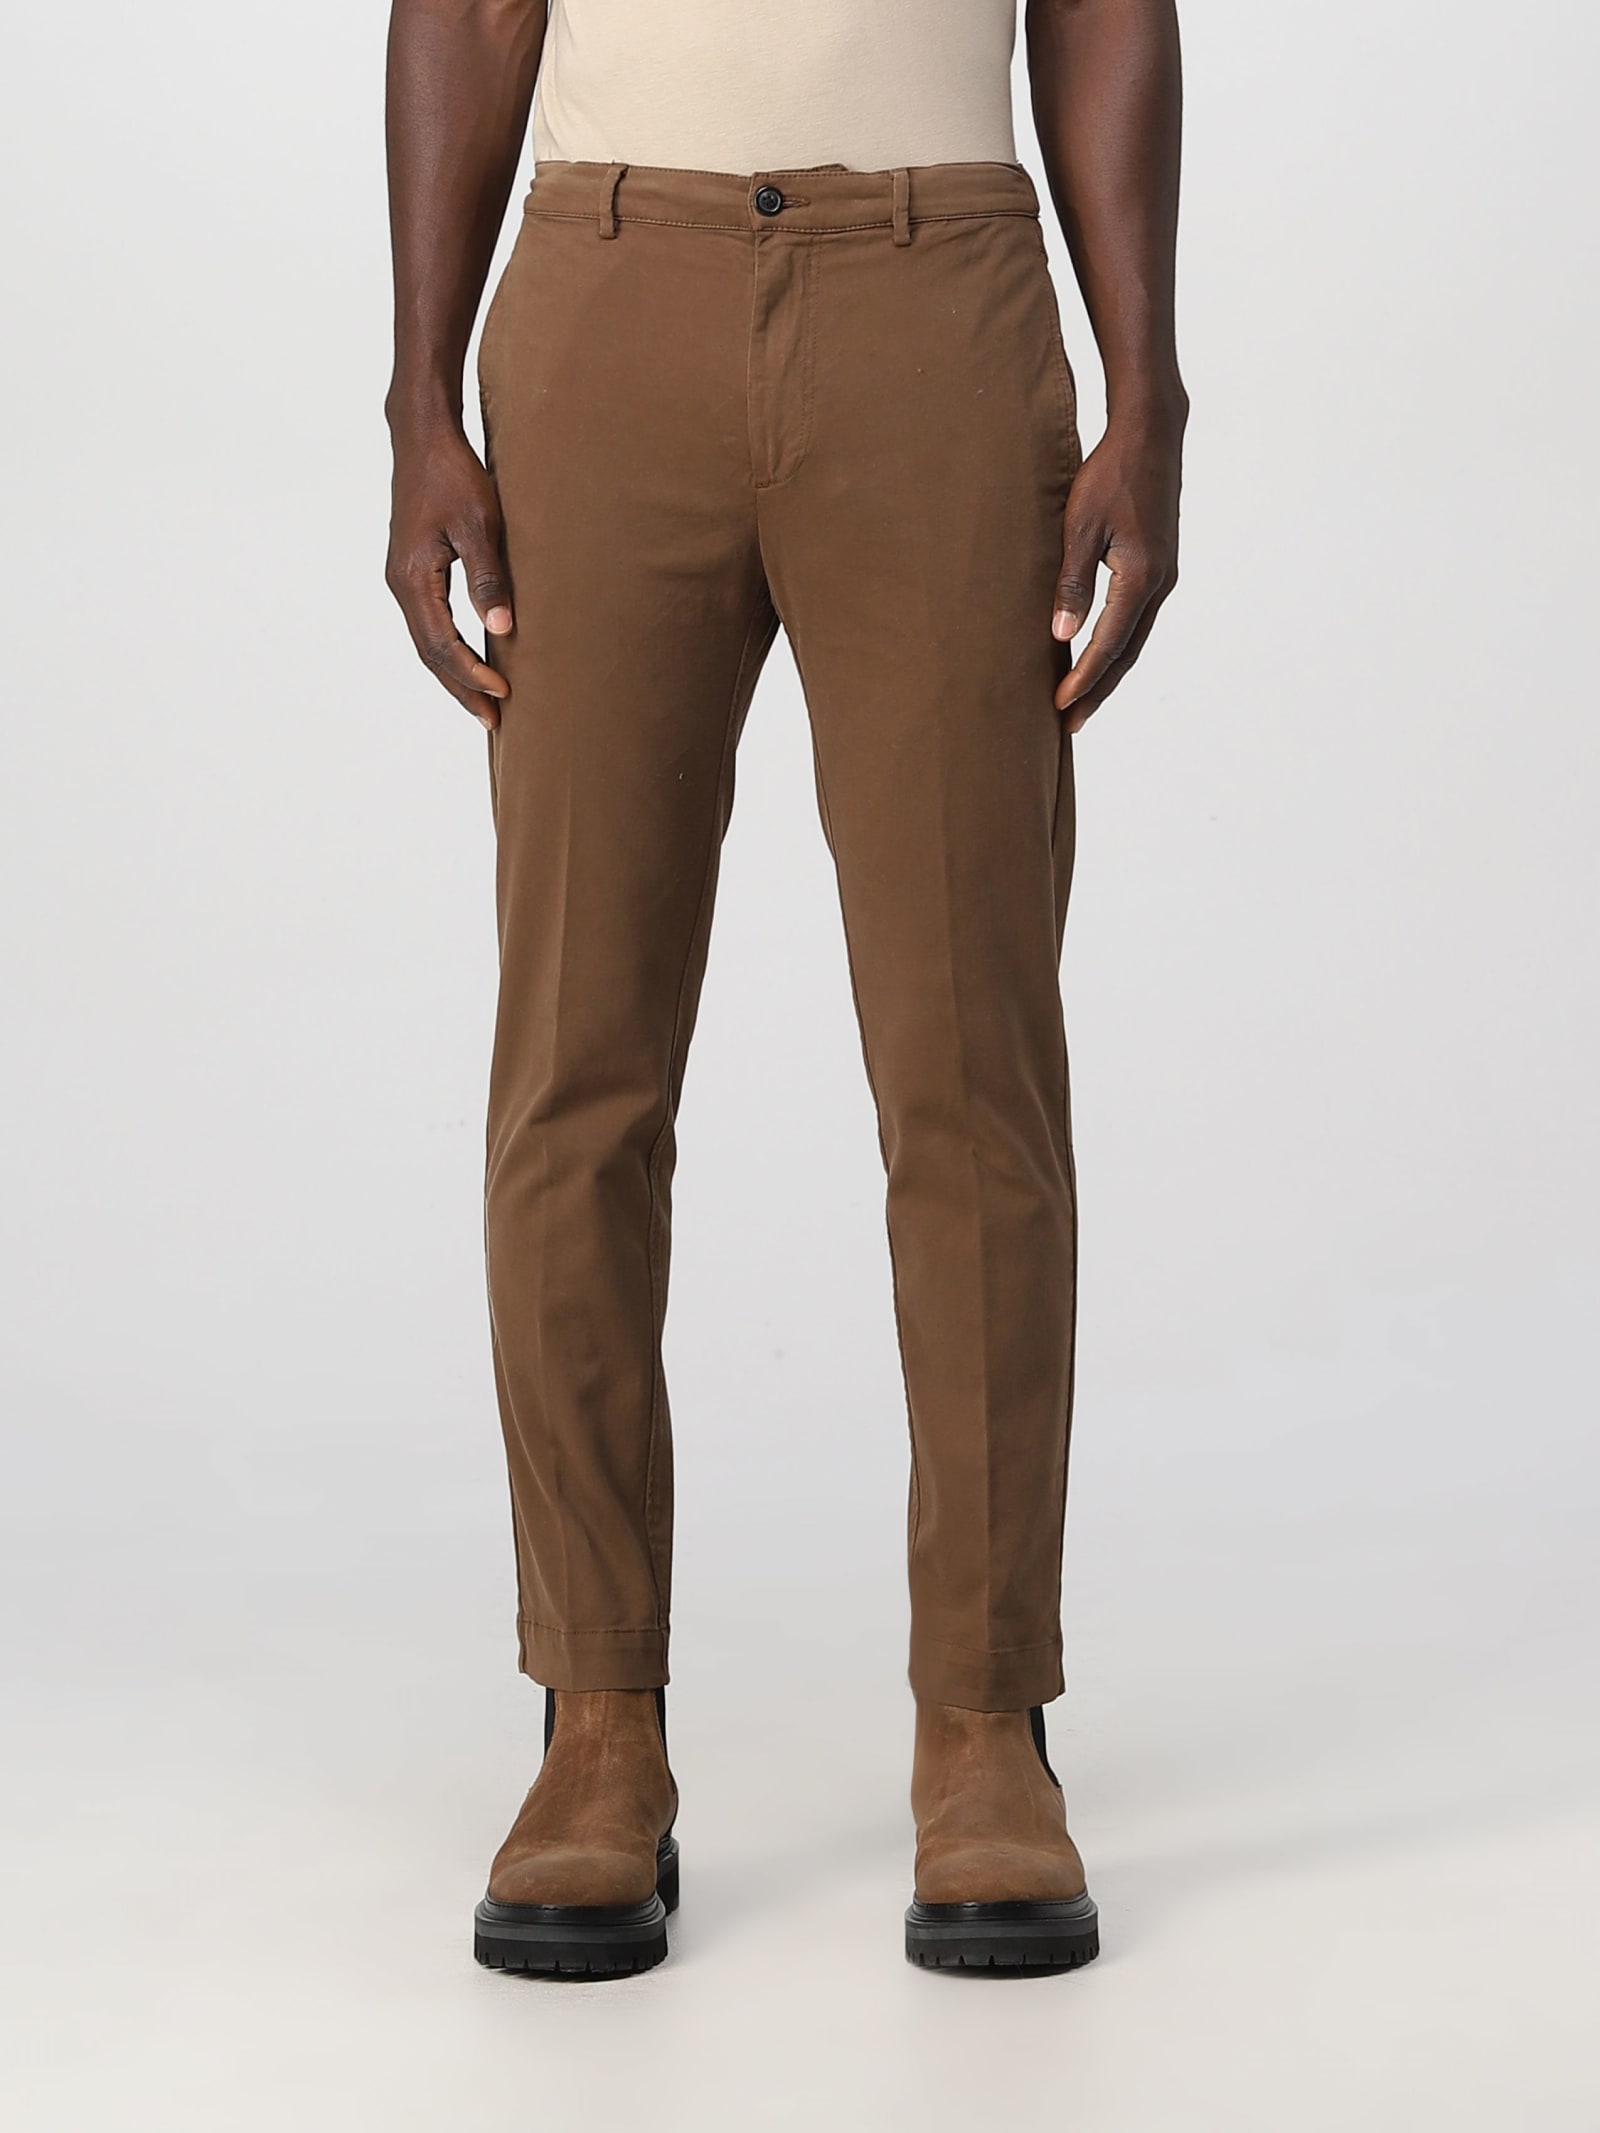 Mauro Grifoni Cotton Pants With Drawstring